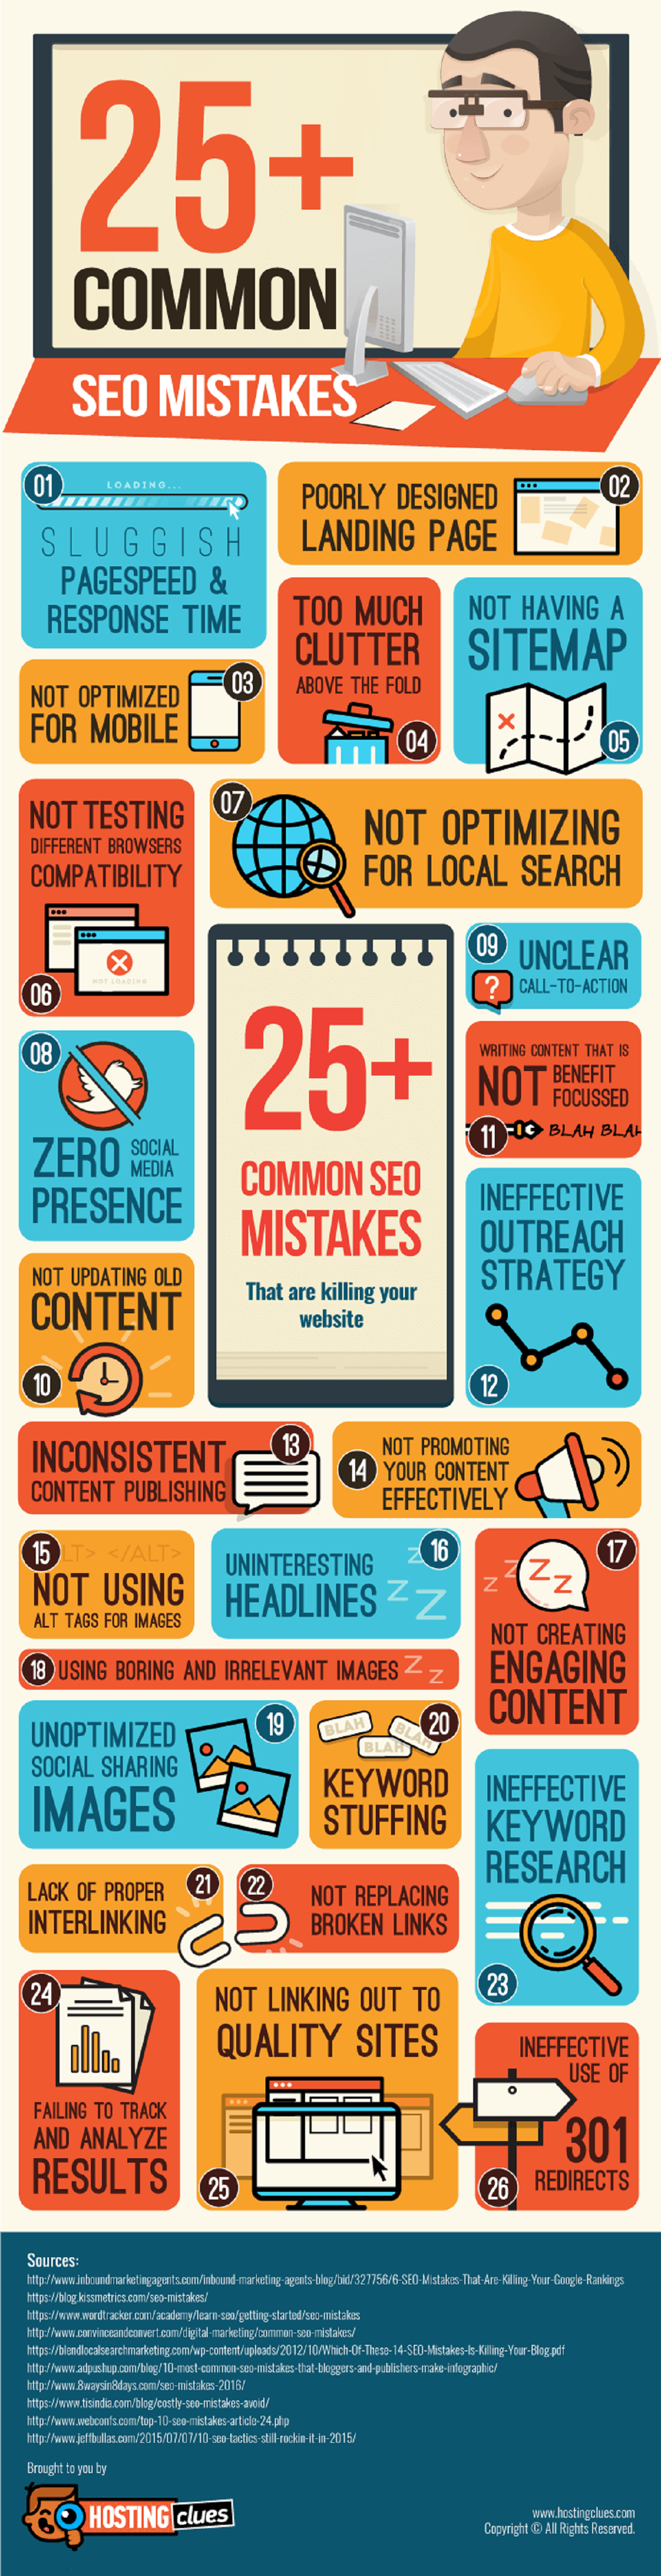 25-common-seo-mistakes-infographic-that-are-killing-your-website-2020-infographic